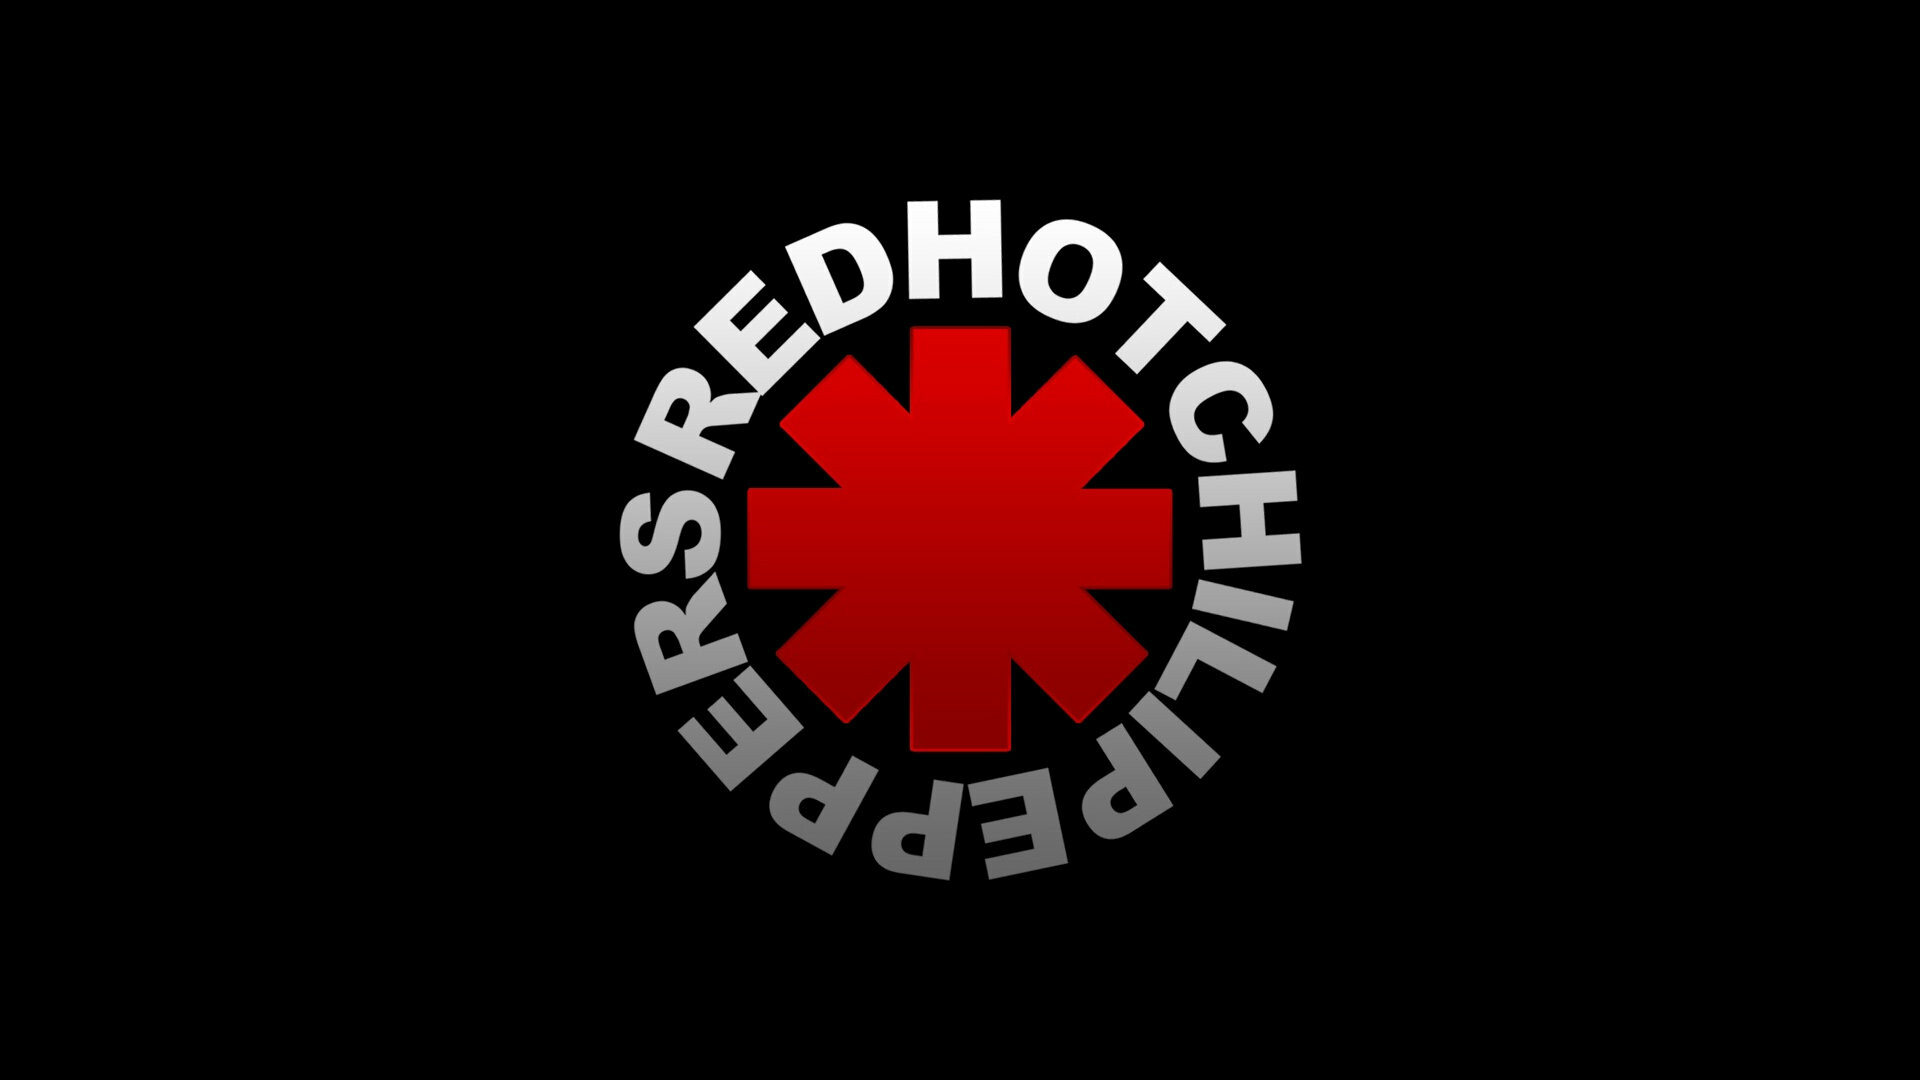 Red Hot Chilli Peppers: One of the more prominent bands in the funk scene. 1920x1080 Full HD Wallpaper.